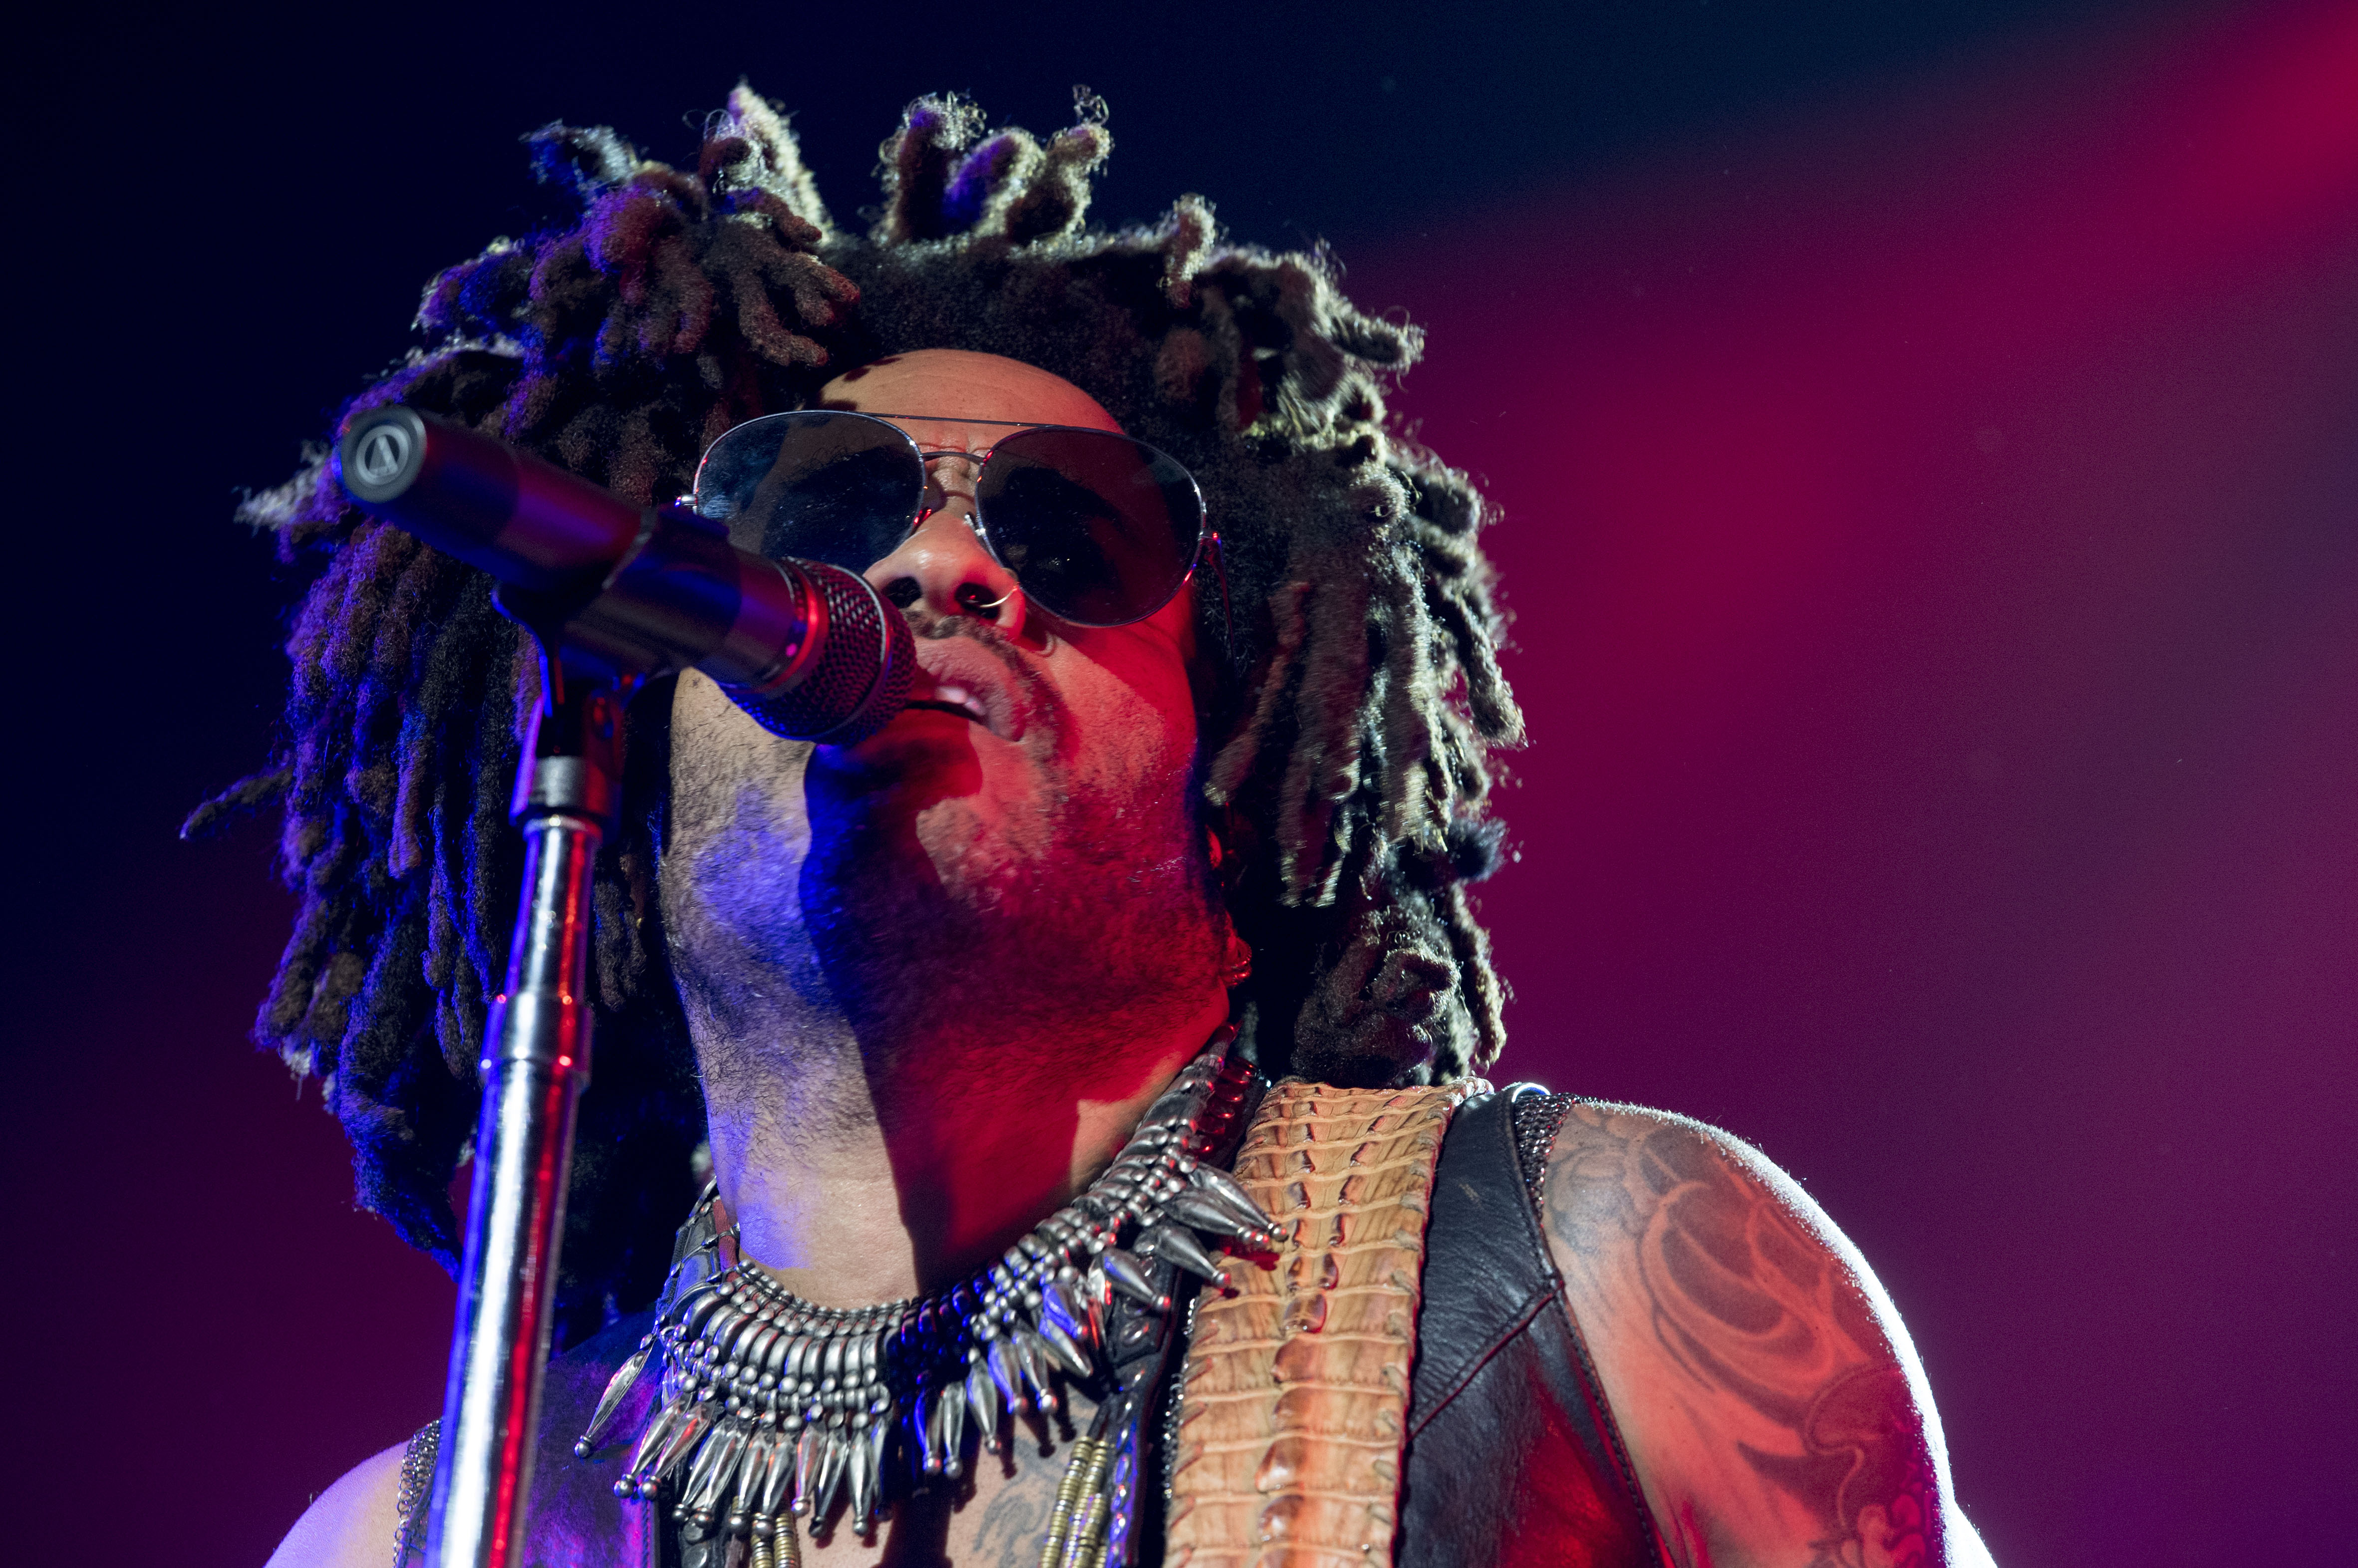 Lenny Kravitz performs at the WiZink Center